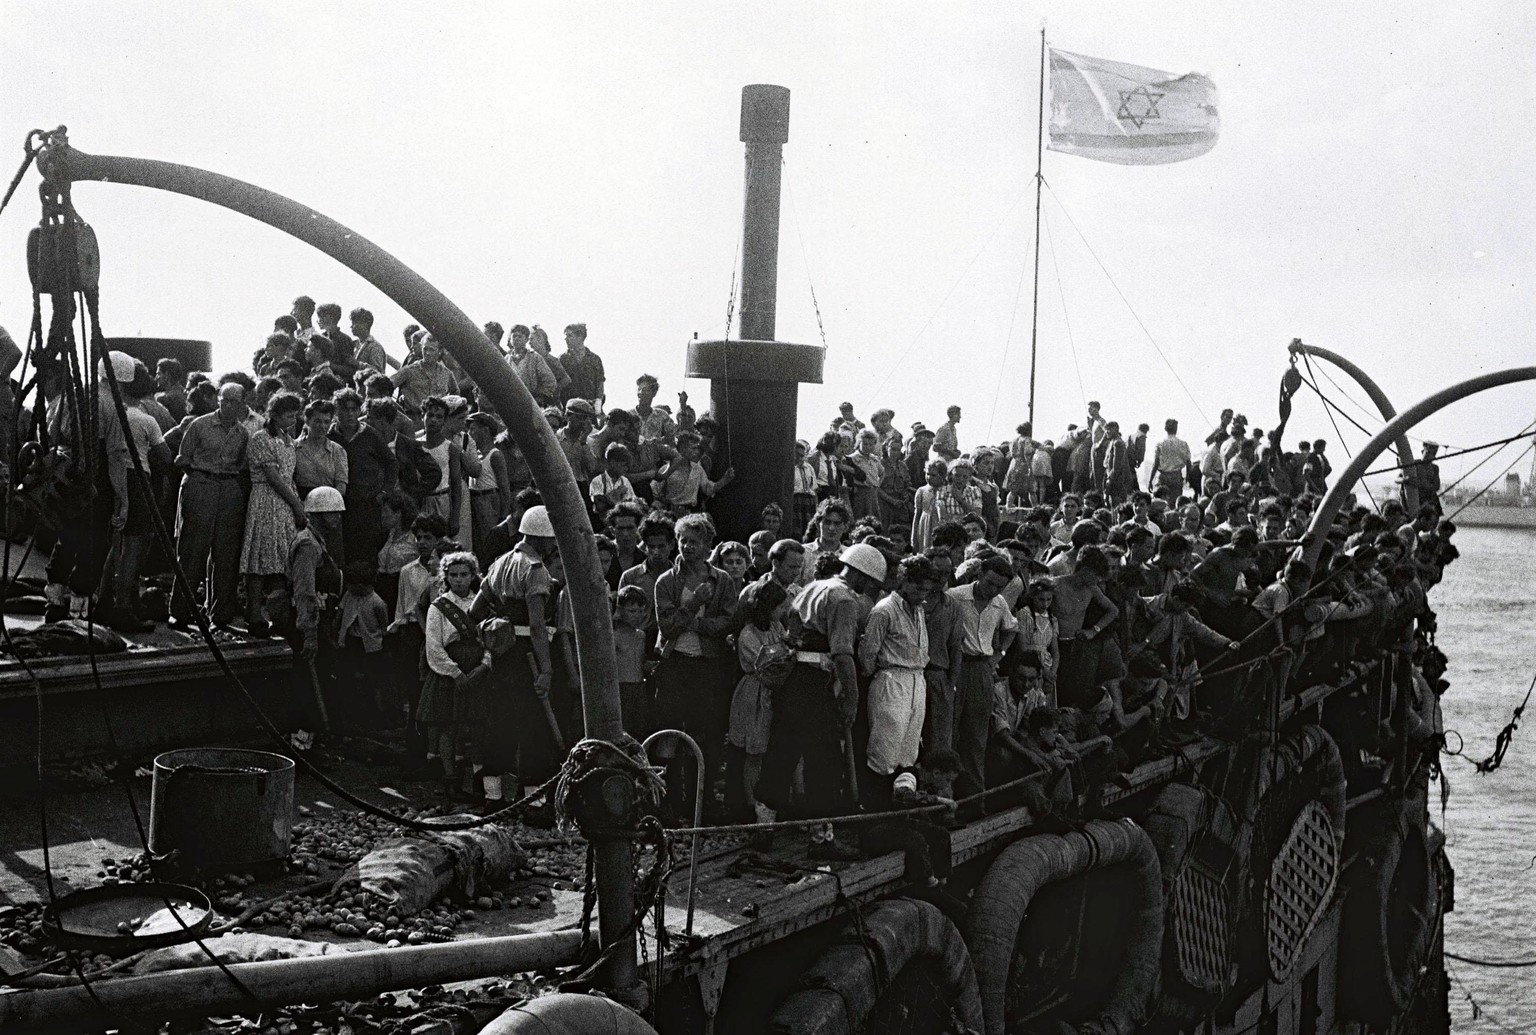 HAIFA, MANDATE PALESTINE - JULY 18, 1947: The Israeli flag flies over the crowded upper deck of the illegal immigration ship Exodus, carrying Jewish refugees from war-torn Europe, July 18, 1947 before ...